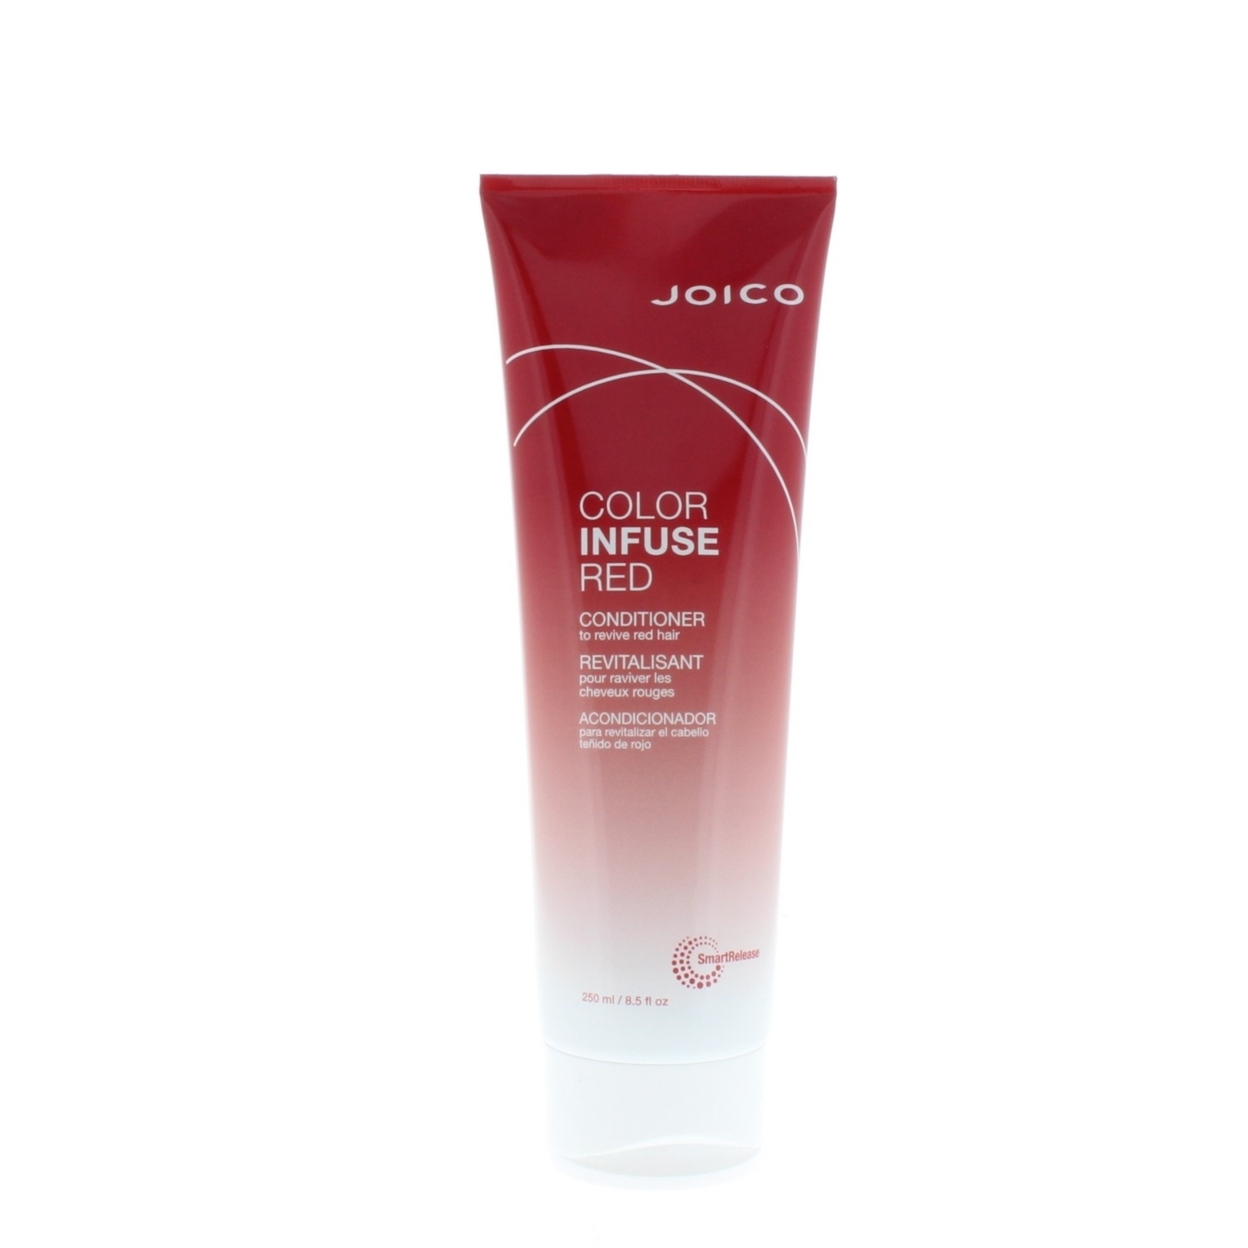 Joico Color Infuse Red Conditioner 8.5oz/250ml